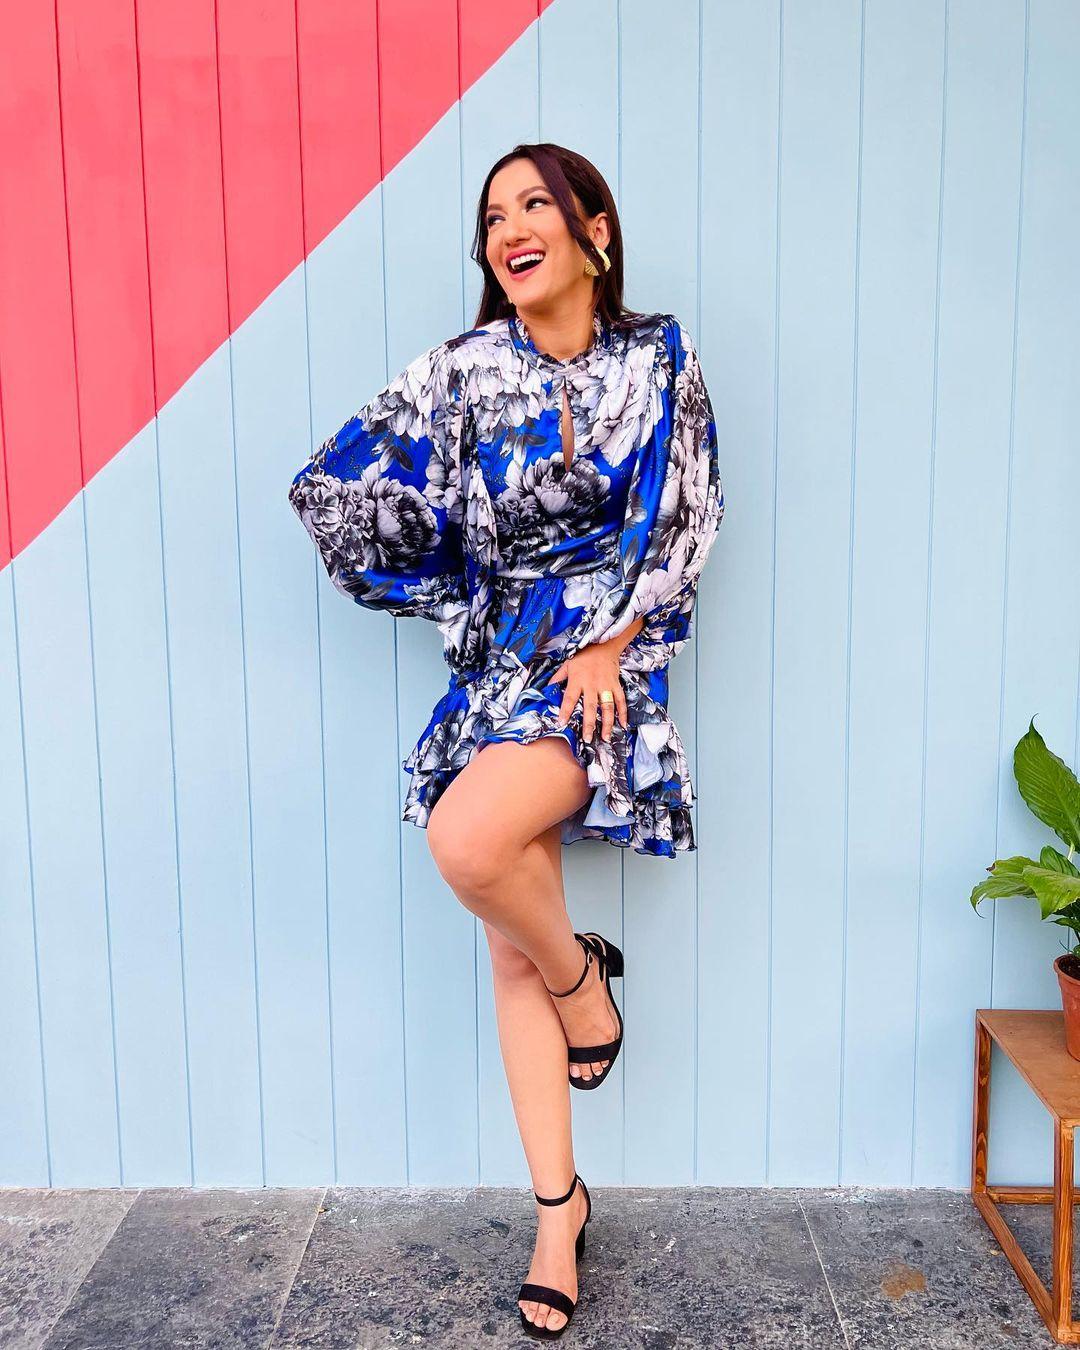 Skipping ahead in time, Gauahar's fashion prowess continued to soar. In this snapshot, she absolutely nailed it in a delightful blue layered dress adorned with a captivating display of floral prints.